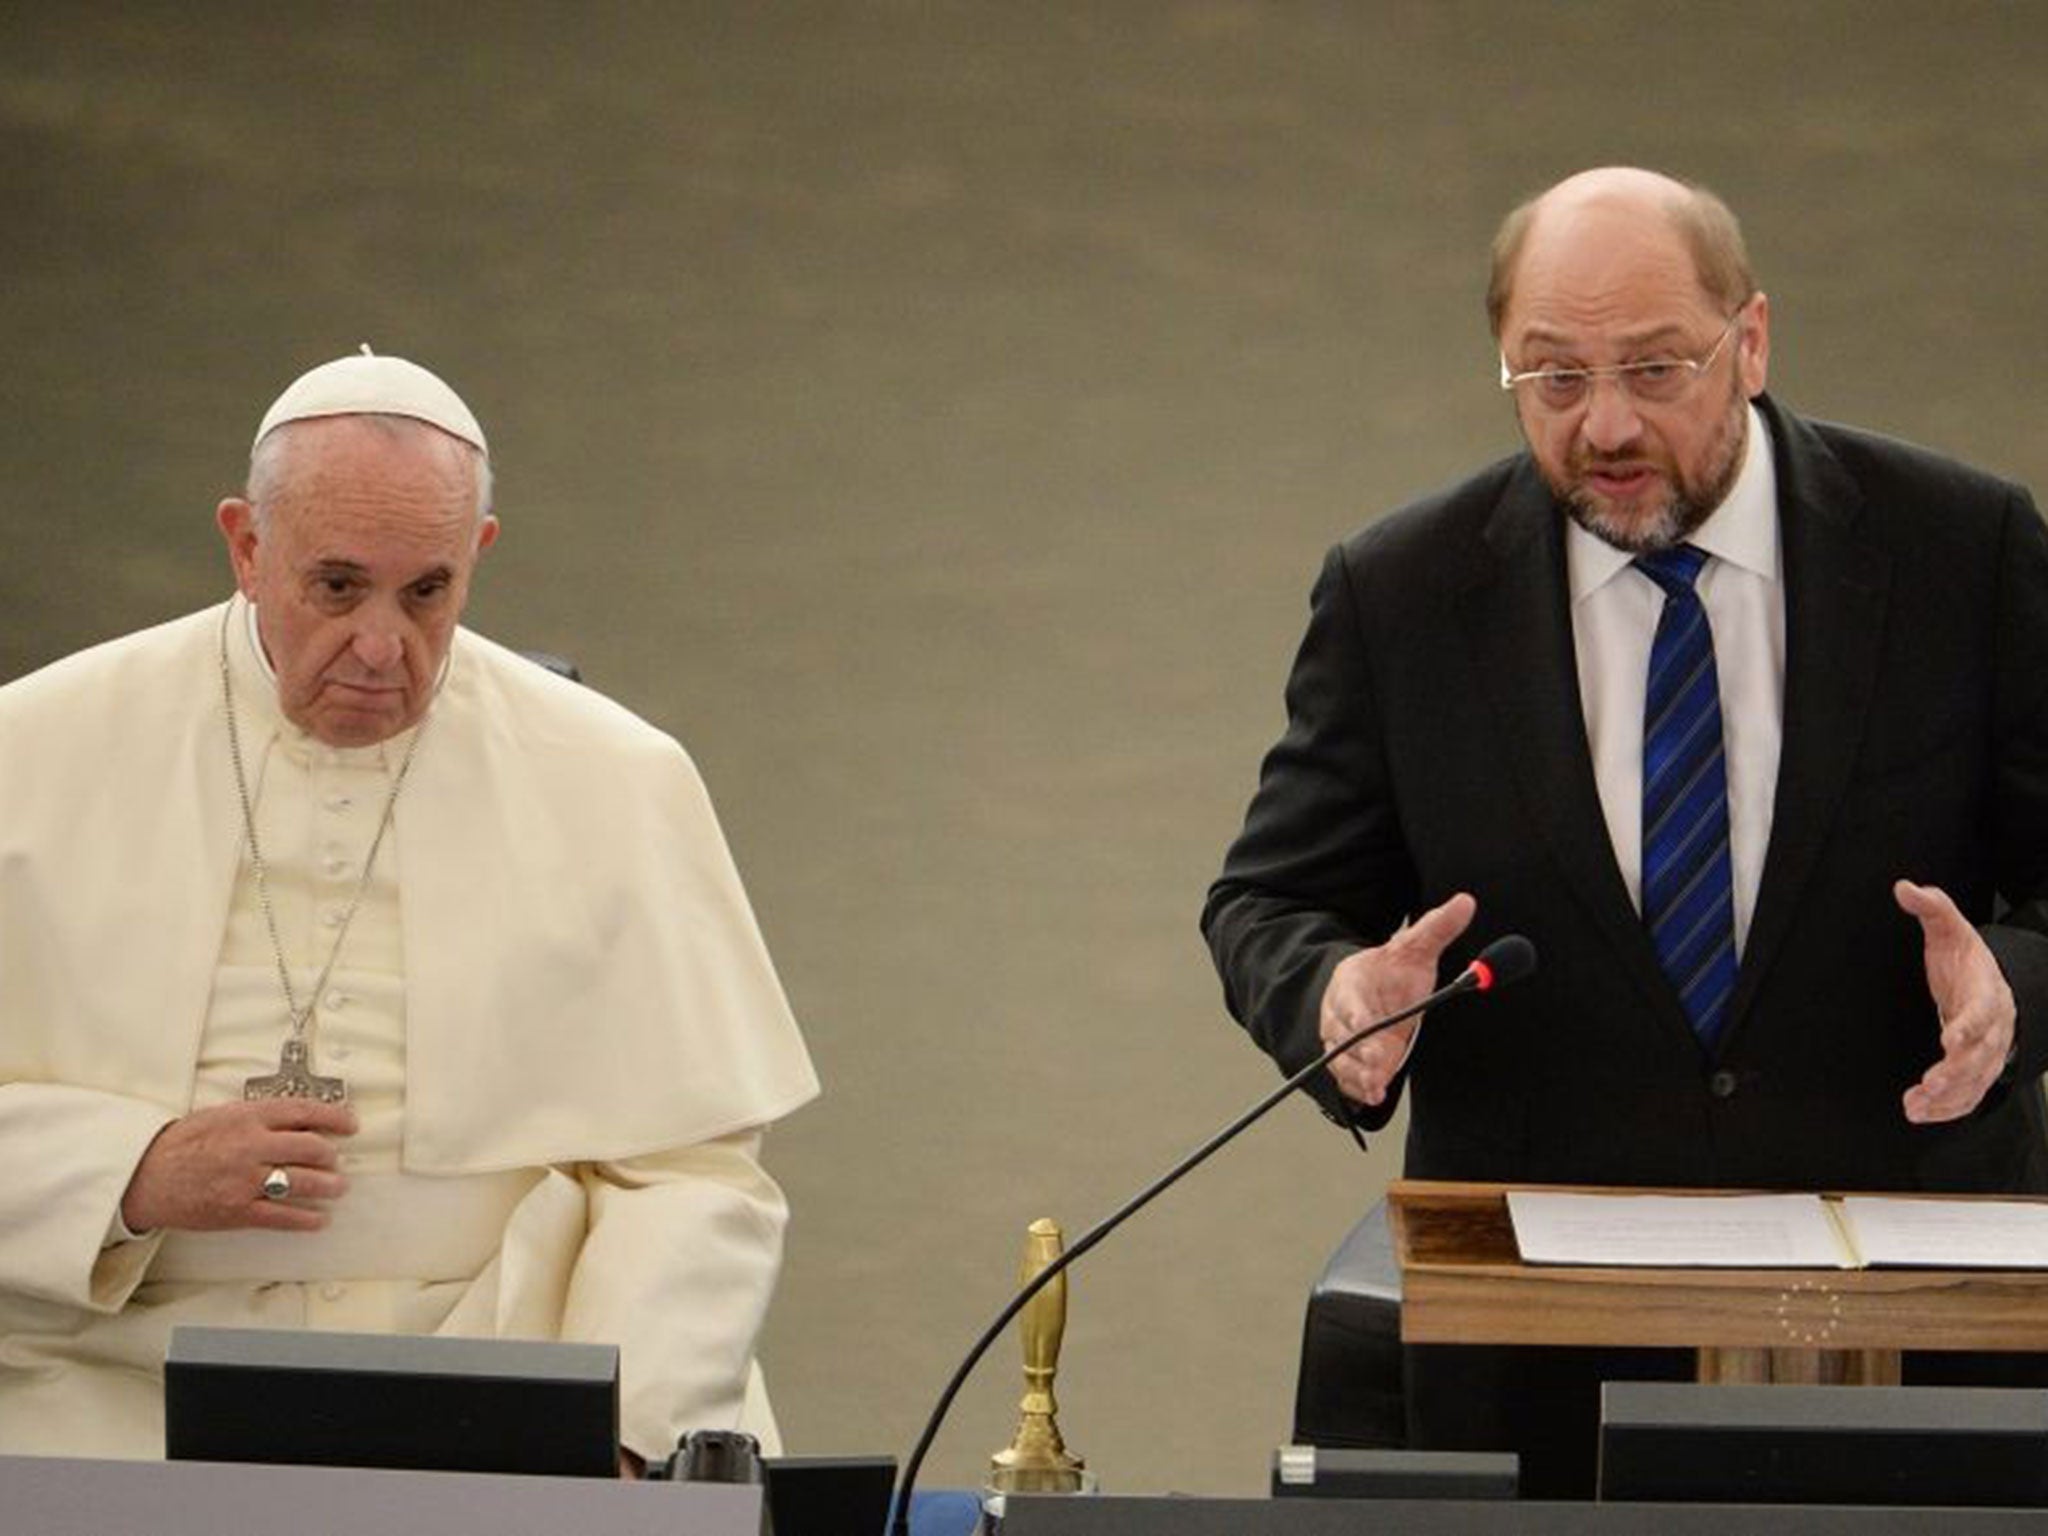 EU Parliament President Martin Schulz (R) welcomes Pope Francis (L) before his speech at the European Parliament in Strasbourg, France, on 25 November, 2014